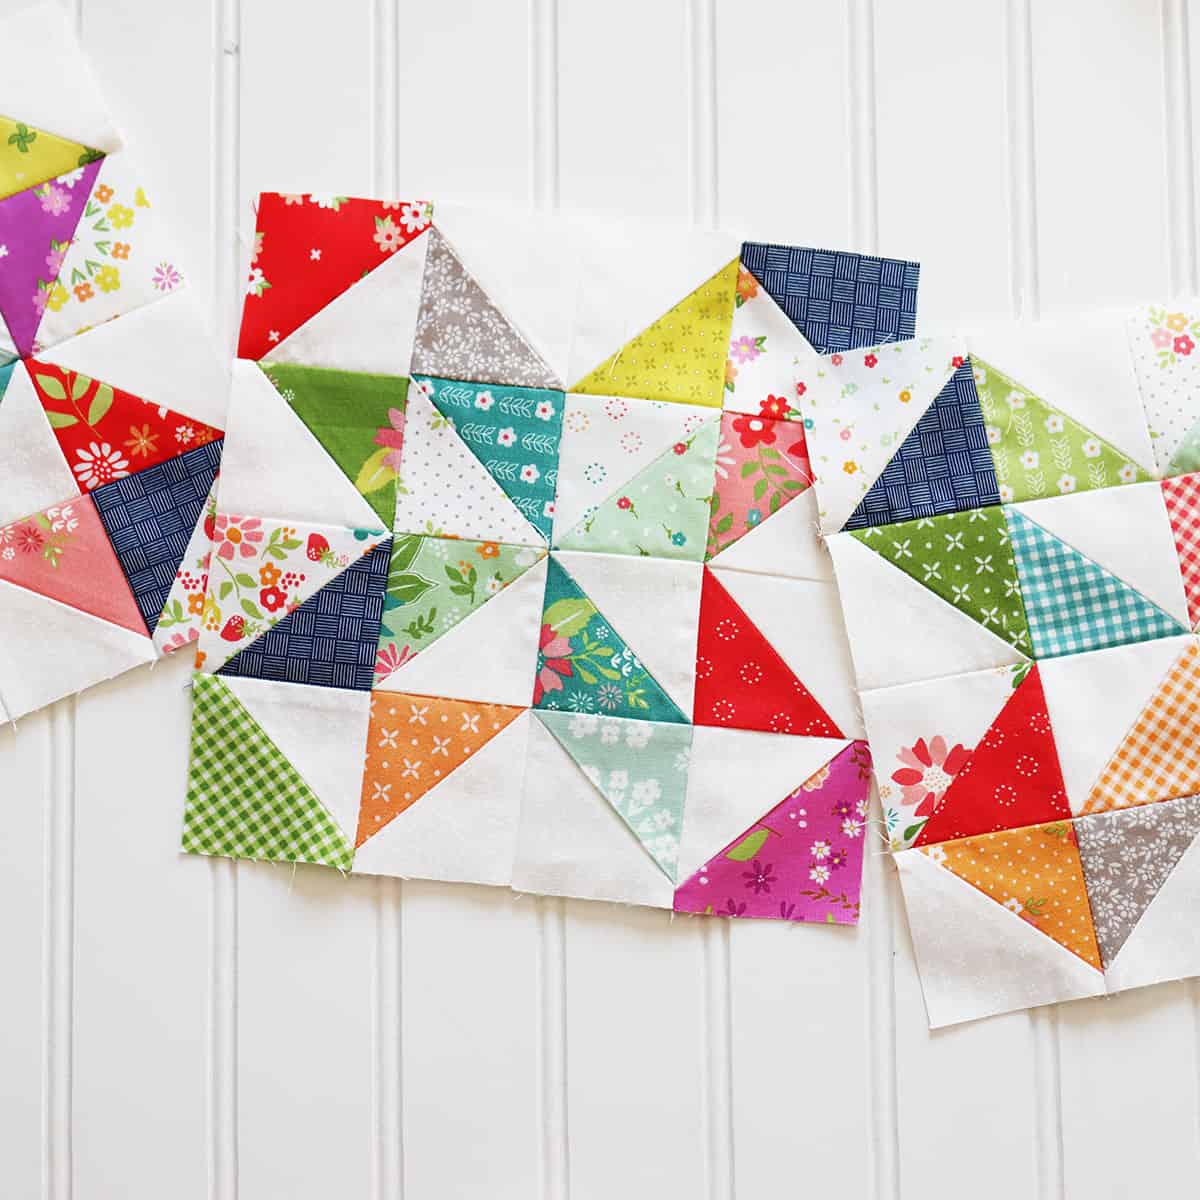 Scrappy half-square triangle blocks by Sherri from A Quilting Life